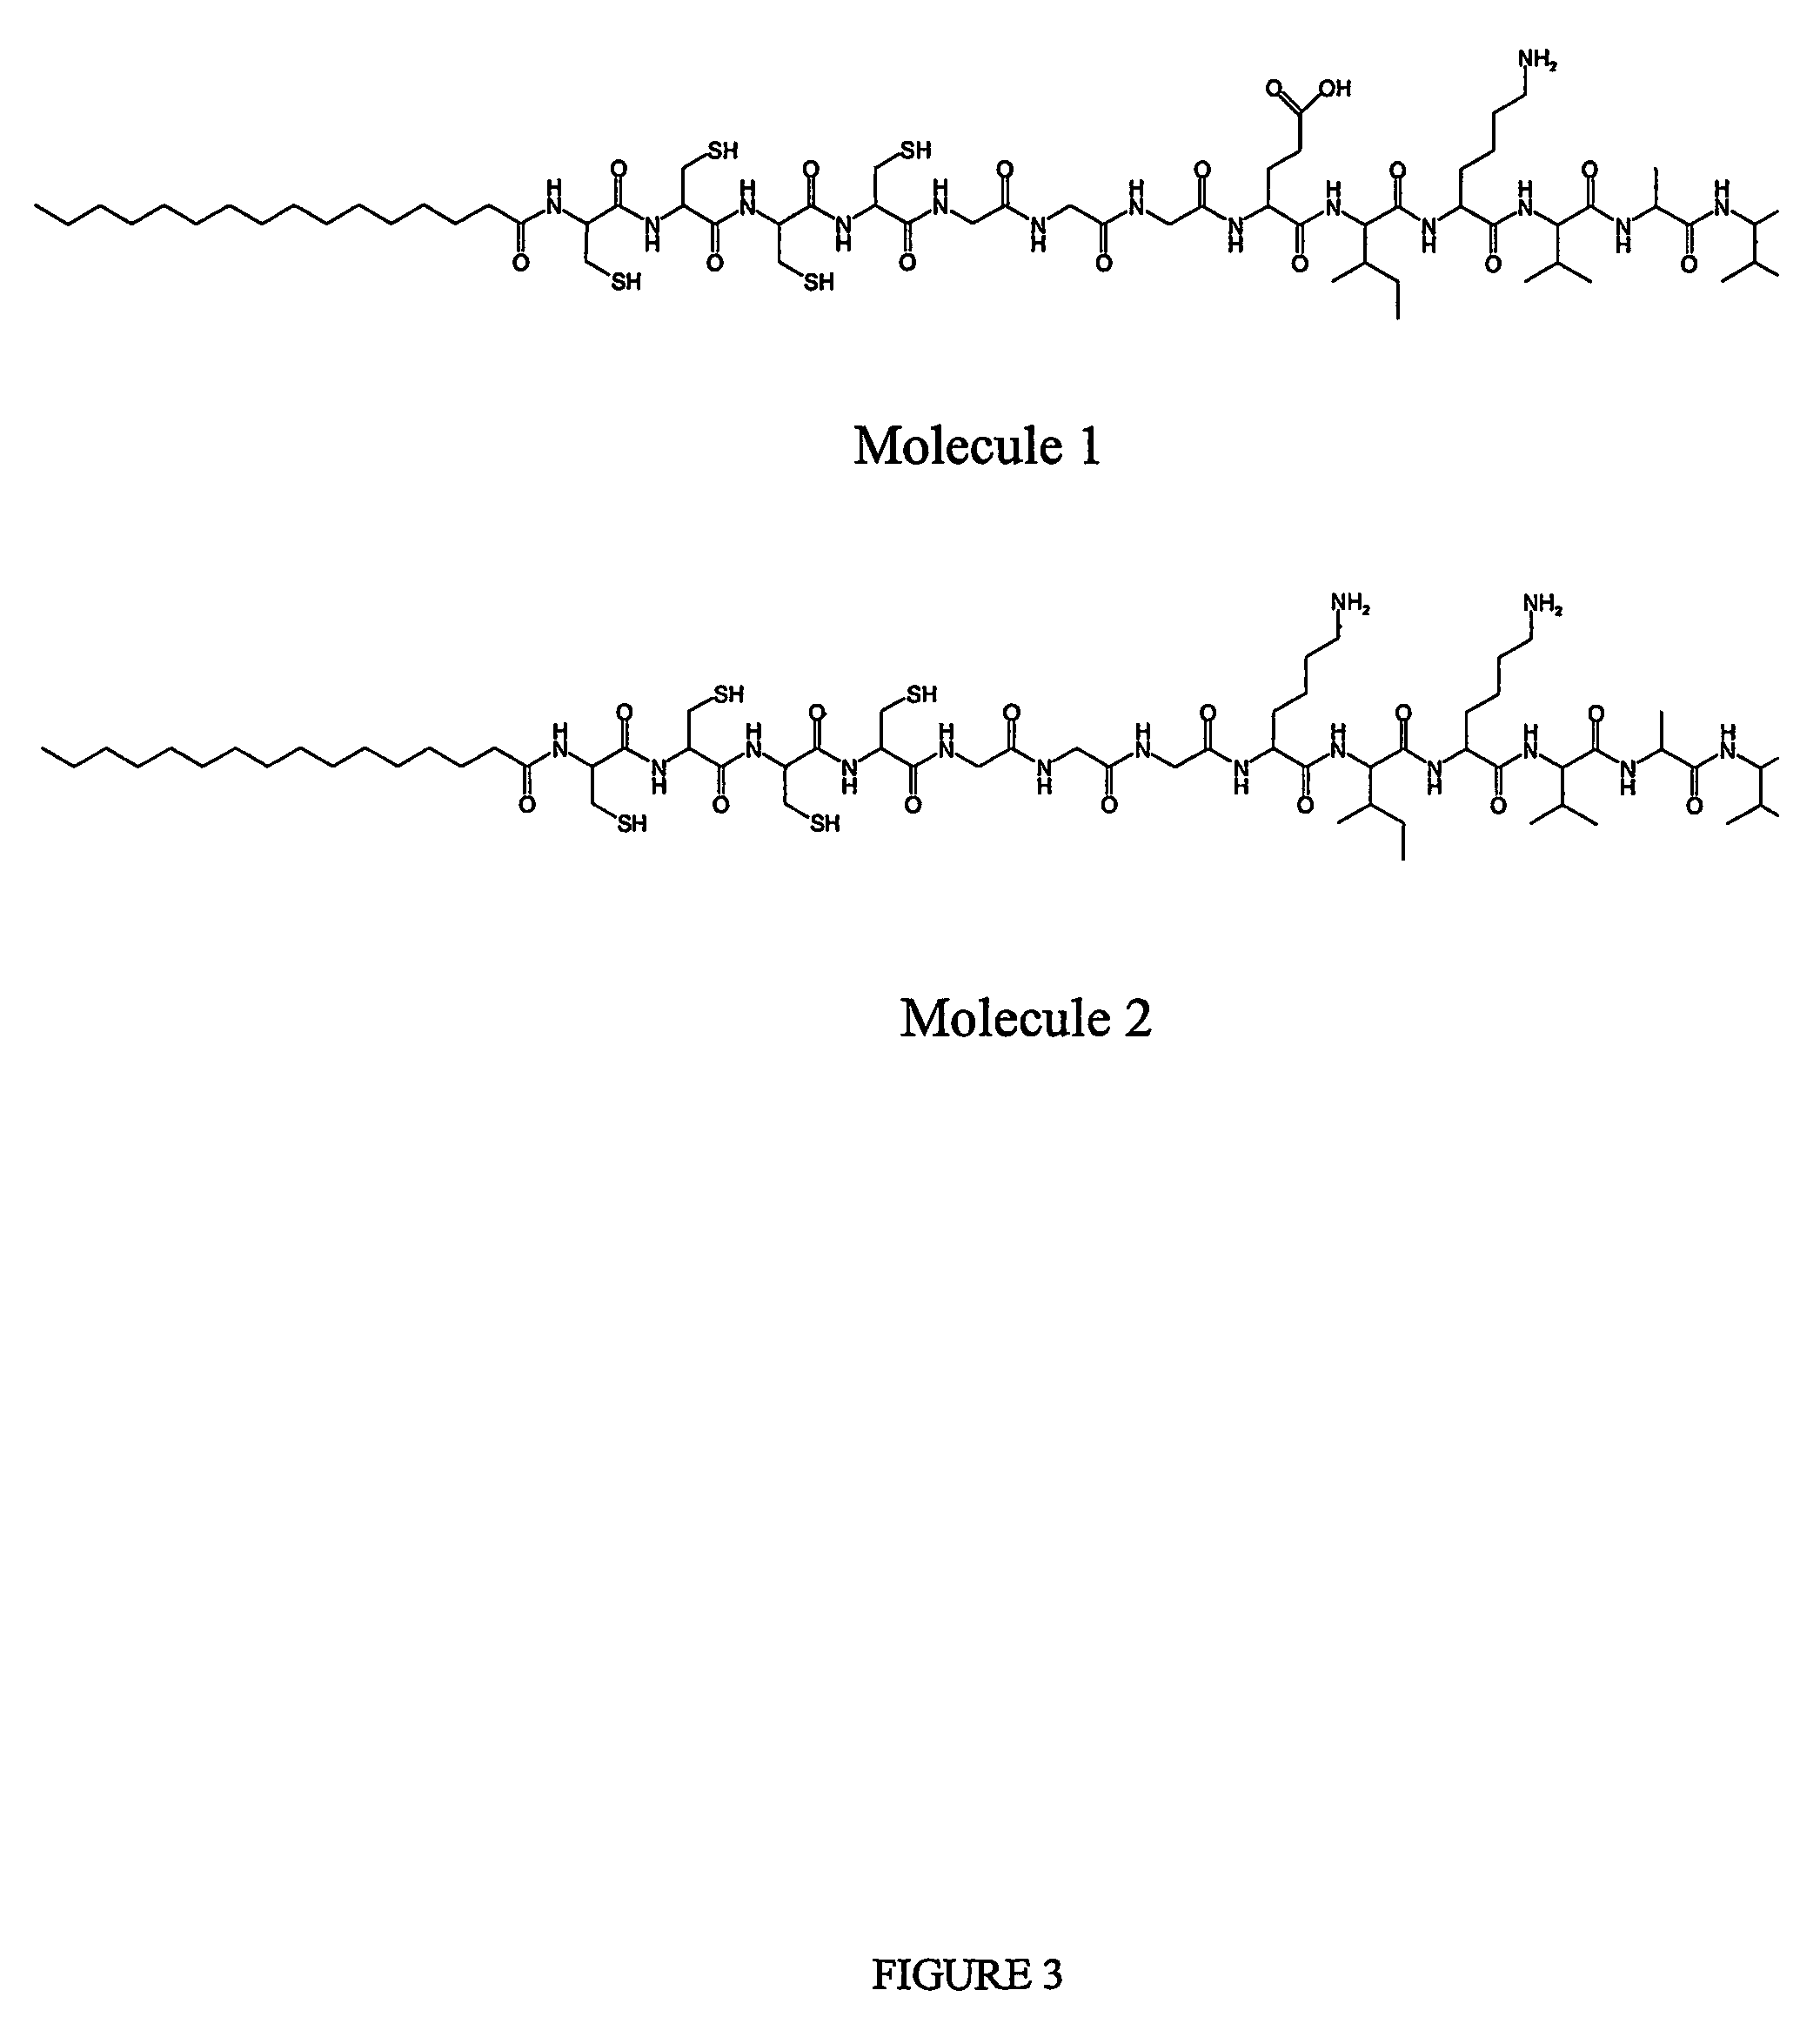 Composition and method for self-assembly and mineralization of peptide amphiphiles